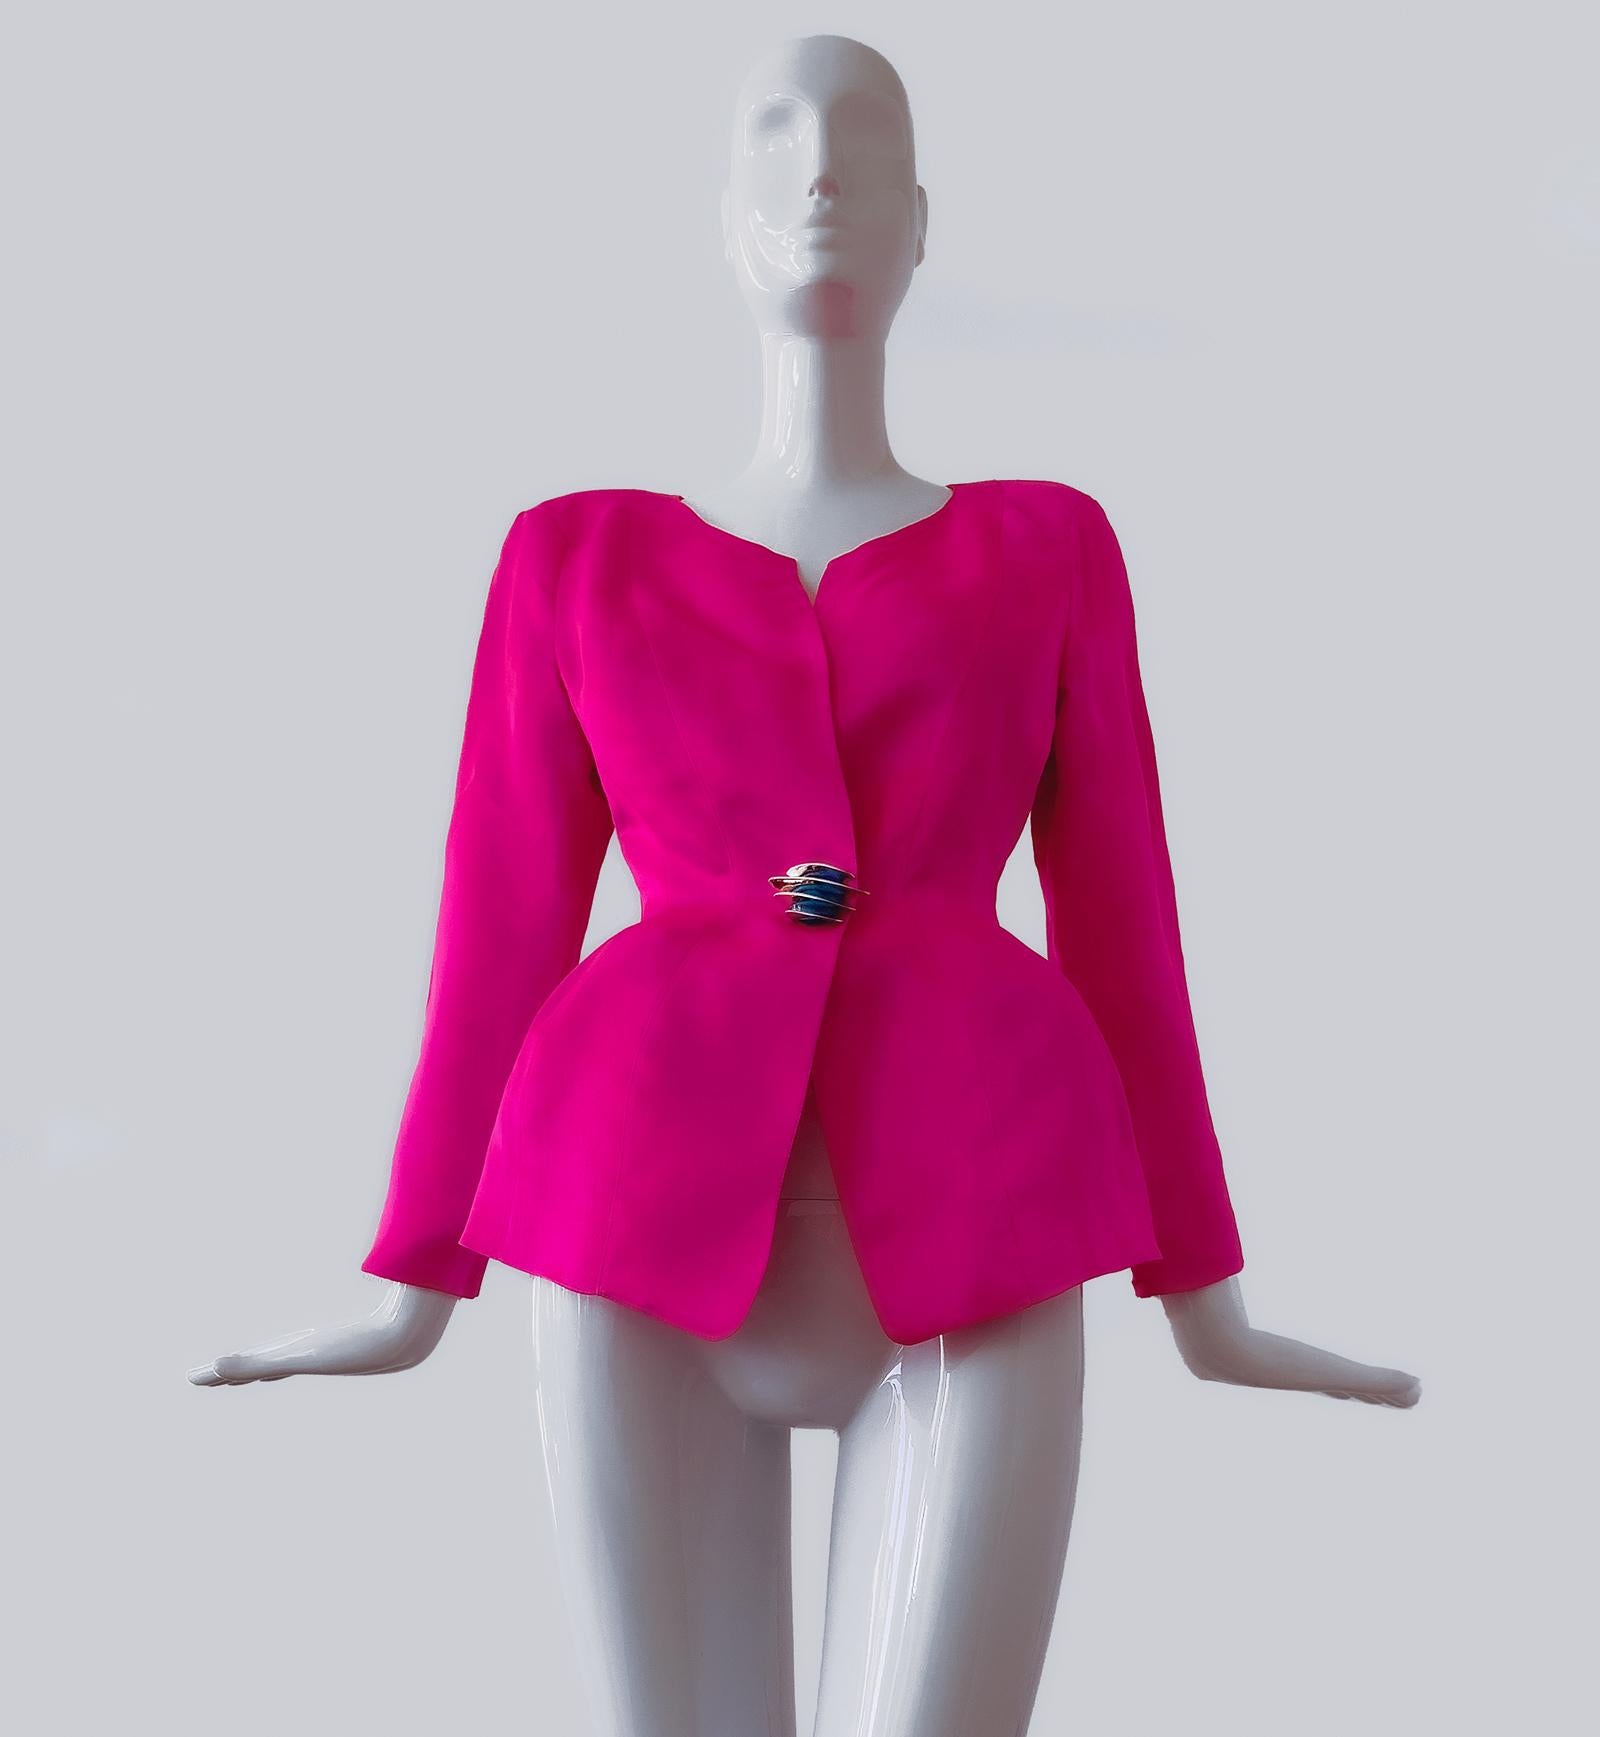 
Amazing and extremely rare Thierry Mugler jacket. 100% pure Silk in fabulous hot pink colour. Sculptural fitted waist and exageratted hips - truly a divine Thierry Mugler creation! Eyecatcher is the big silver metal and cabochon button element at